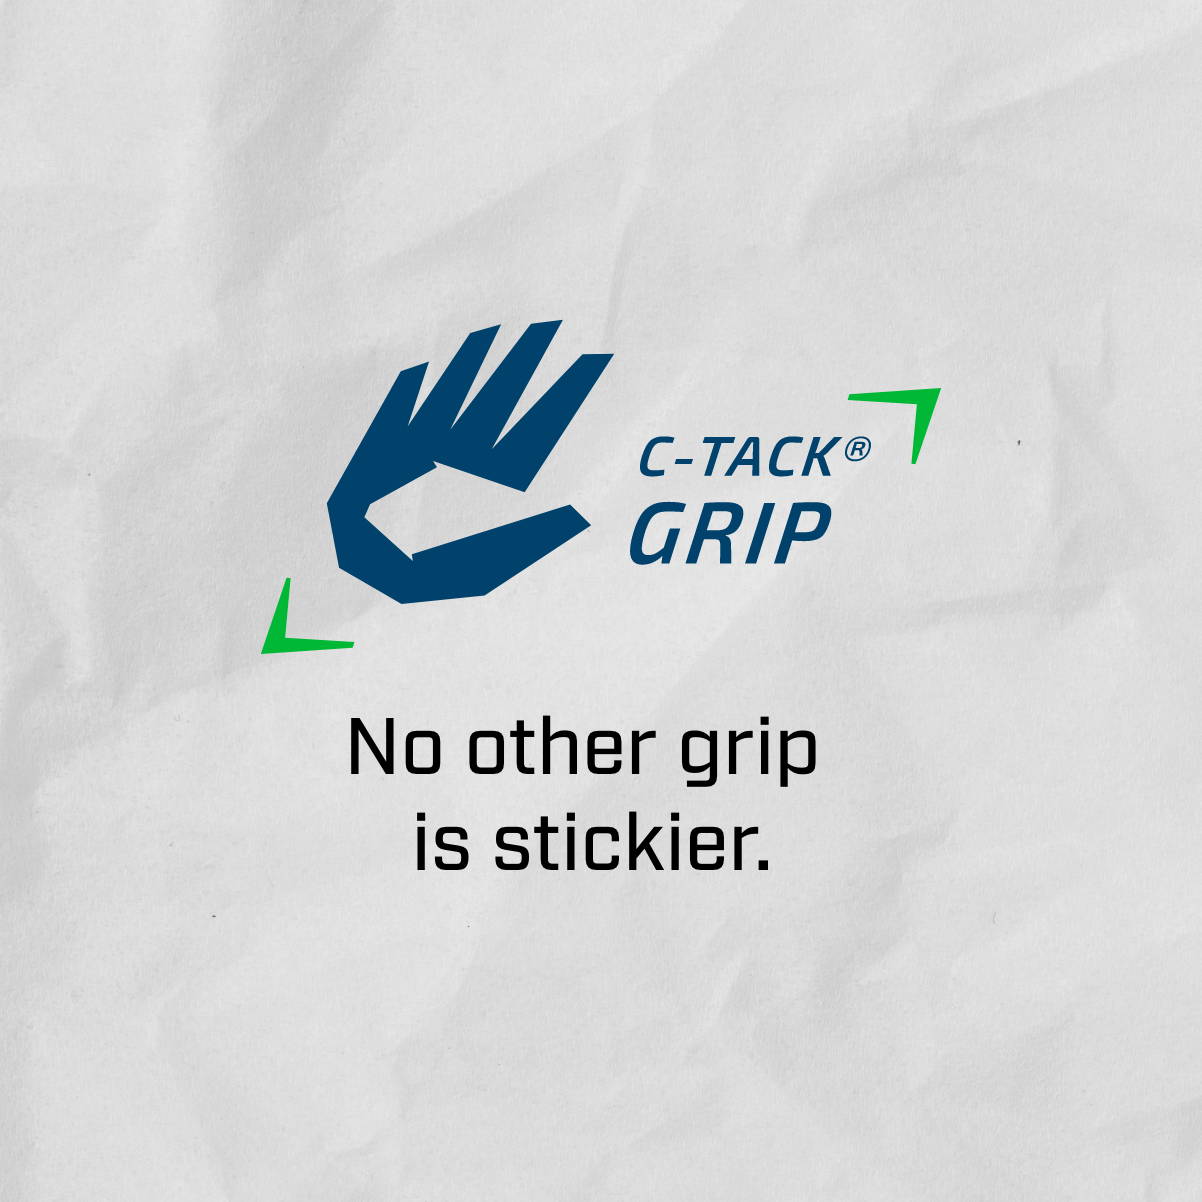  C-TACK Grip - Our griip is a trade secret that has often been imitated by competitors - yet they never come close to matching C-TACK's stick, durability and performance